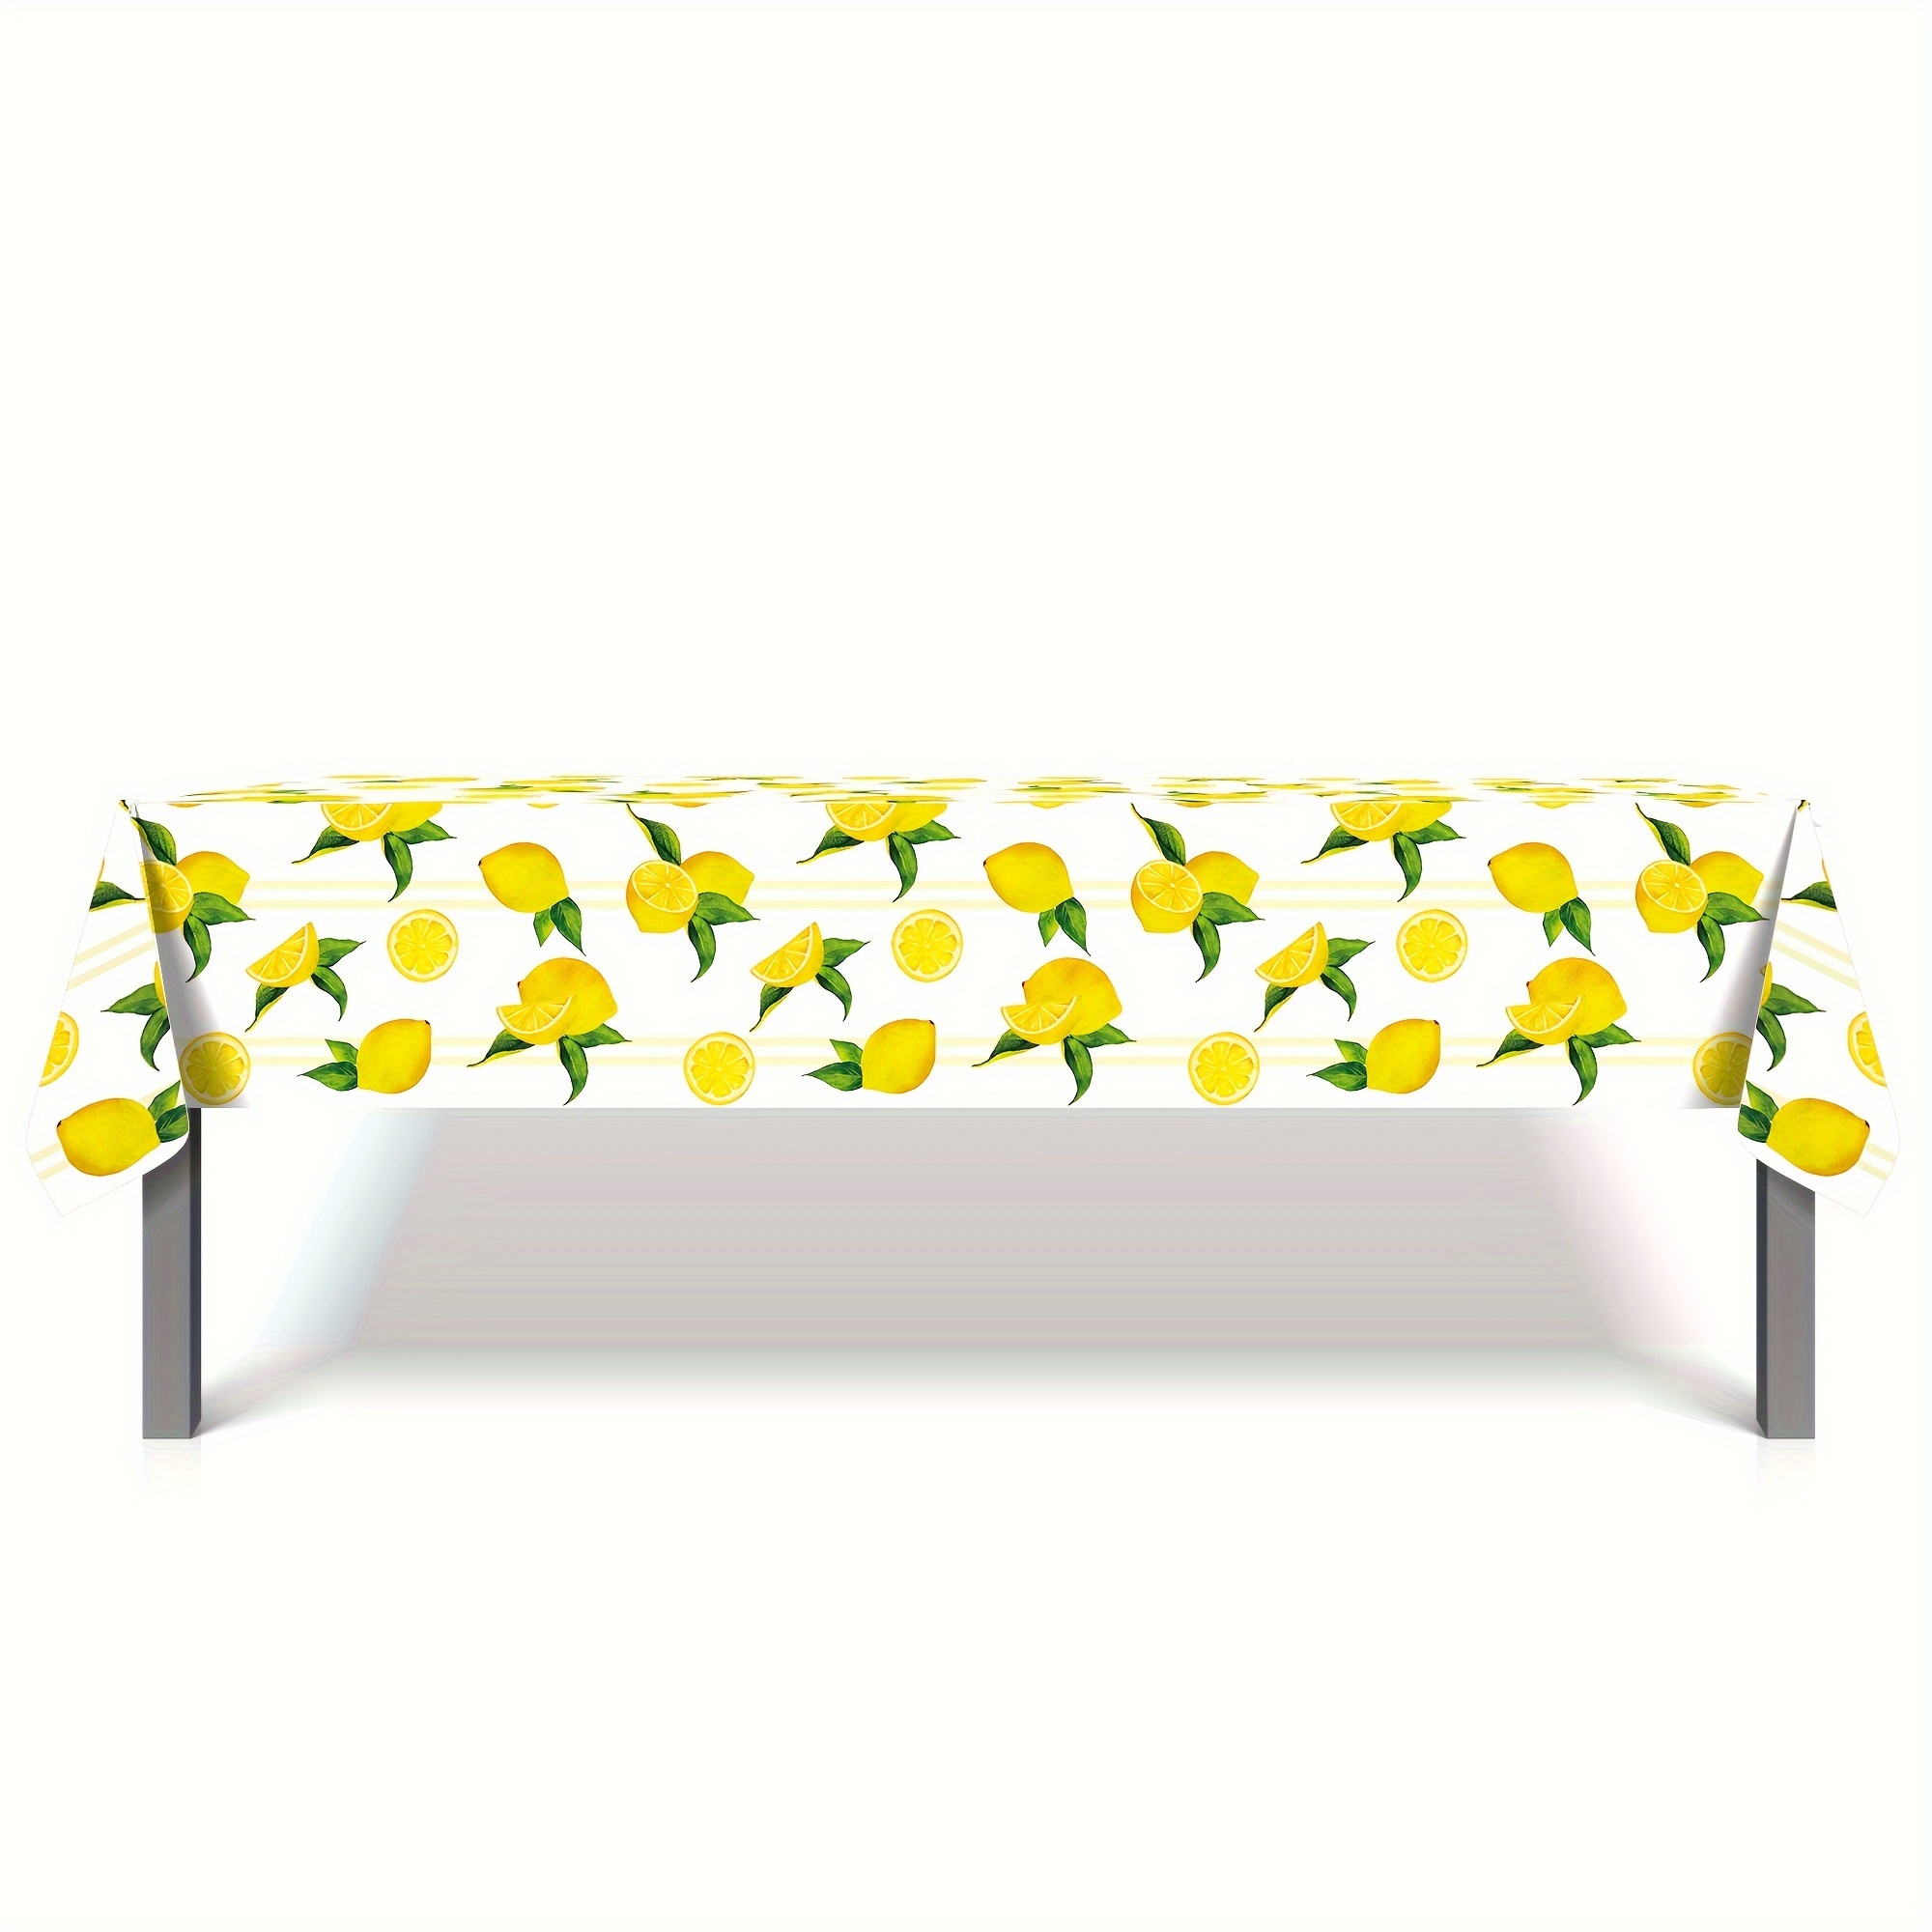 

Disposable Lemon Fruit Themed Plastic Tablecloth, 130x220cm, Cartoon , Machine Made Table Cover For Birthdays & General Celebrations, Universal Holiday Party Decor, Pack Of 1